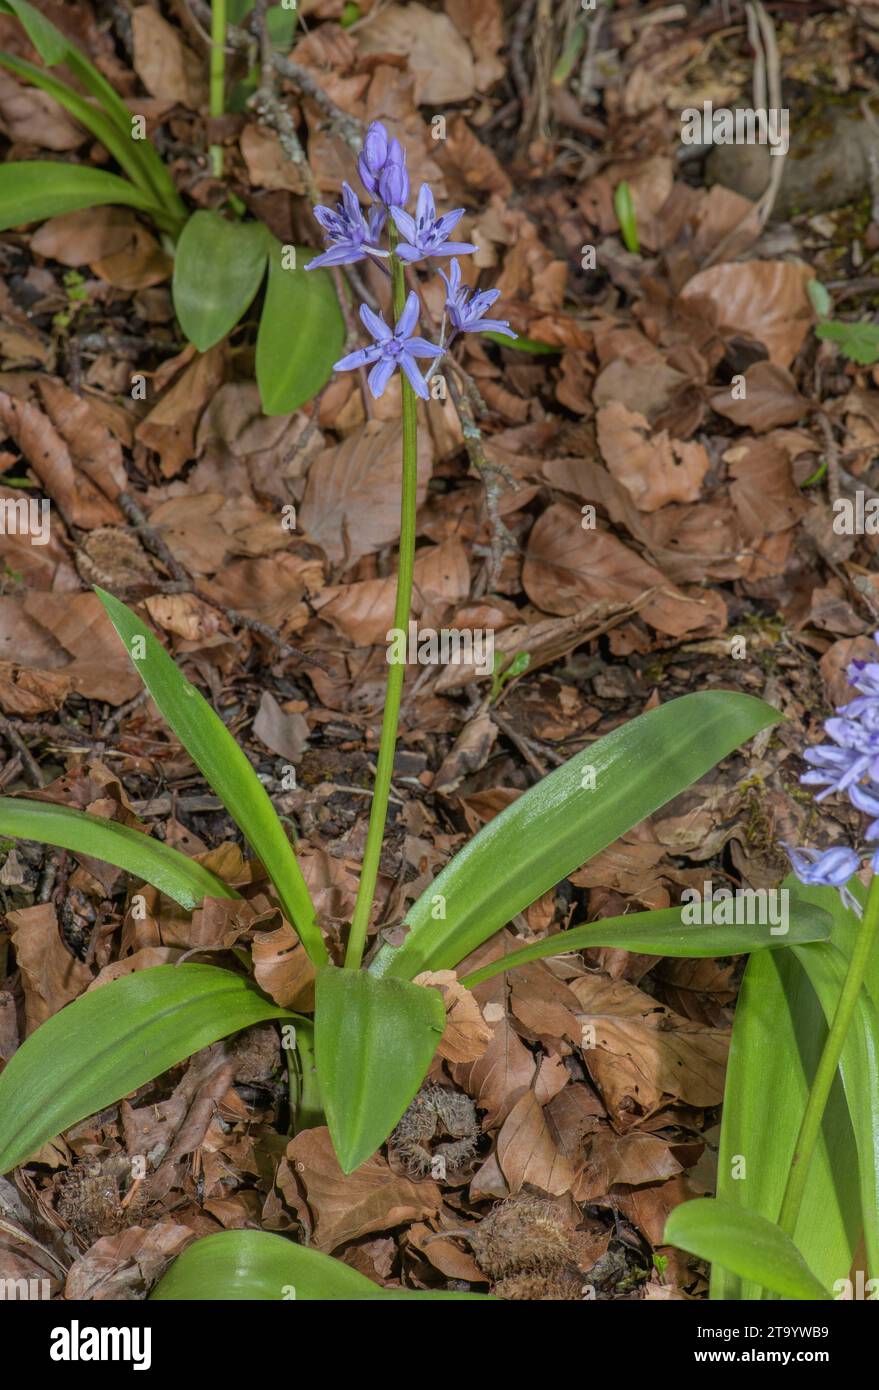 Pyrenean Squill, Tractema lilio-hyacinthus, in woodland, Pyrenees. Stock Photo